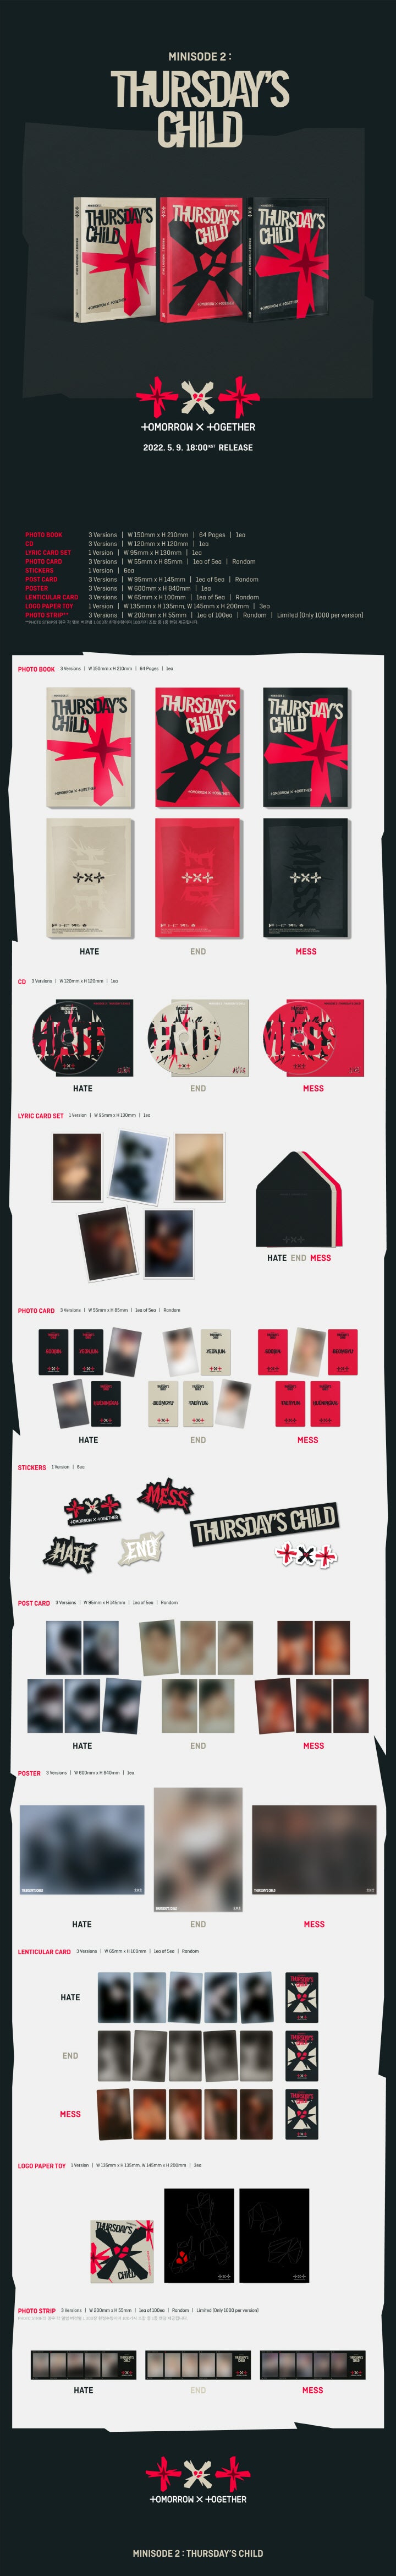 1 CD
1 Photo Book (64 pages)
1 Lyrics Card Set
1 Photo Card (random out of 5 types)
6 Stickers
1 Postcard (random out of 5...